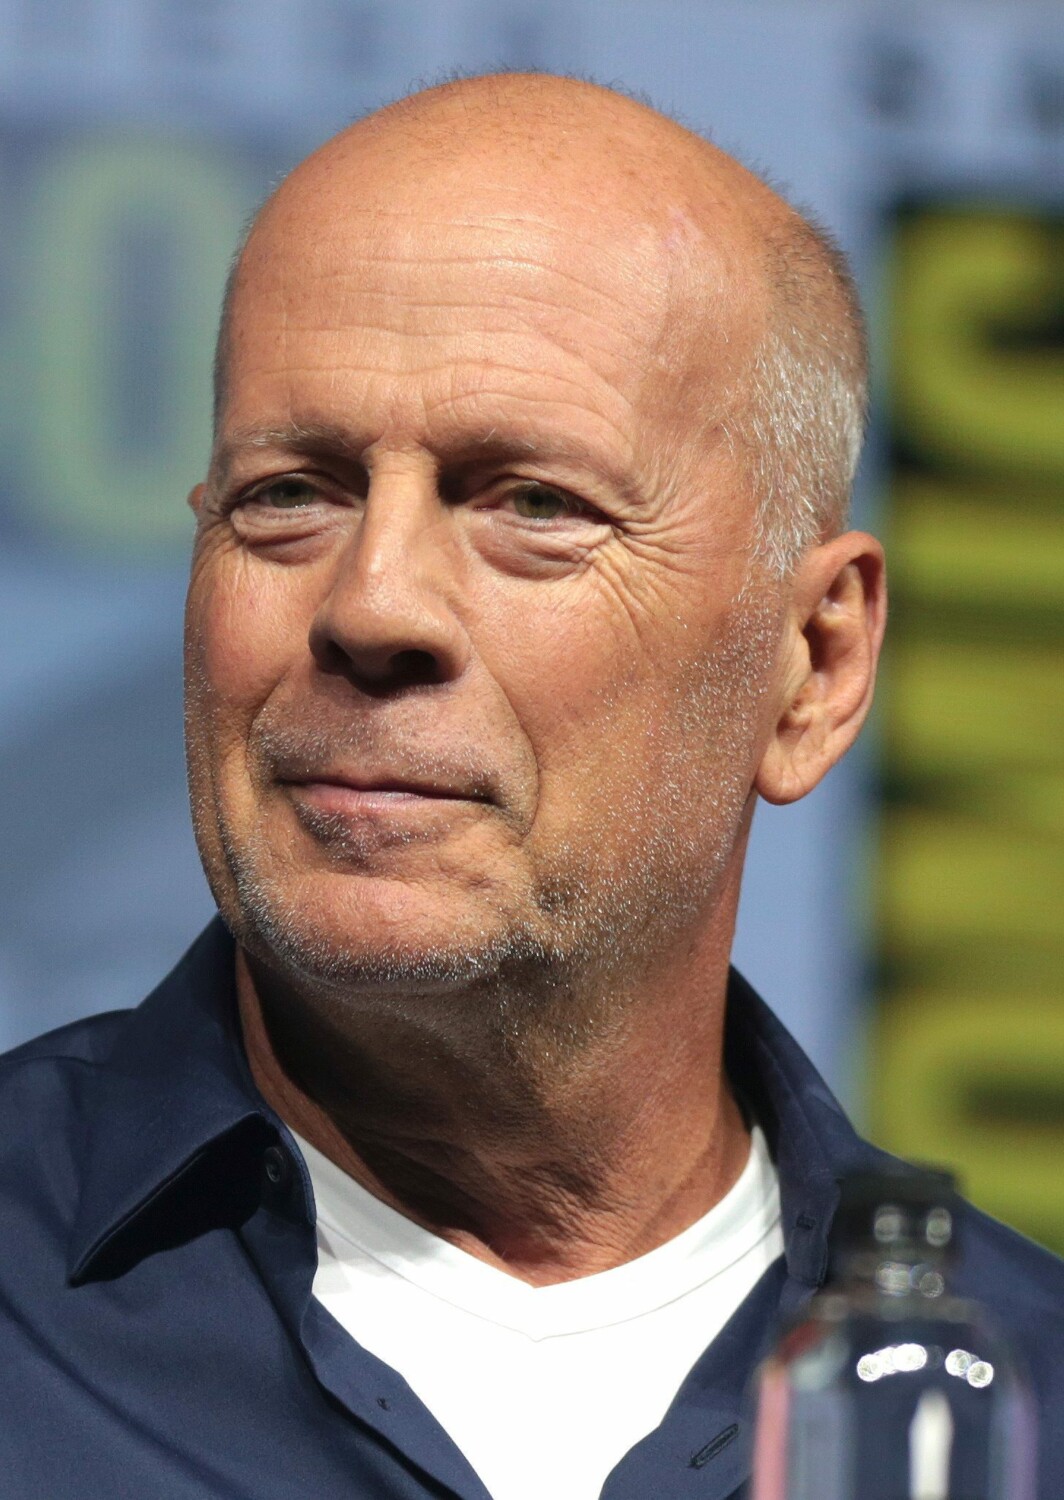 Bruce Willis. By Gage Skidmore, CC BY-SA 3.0, https://commons.wikimedia.org/w/index.php?curid=71131203